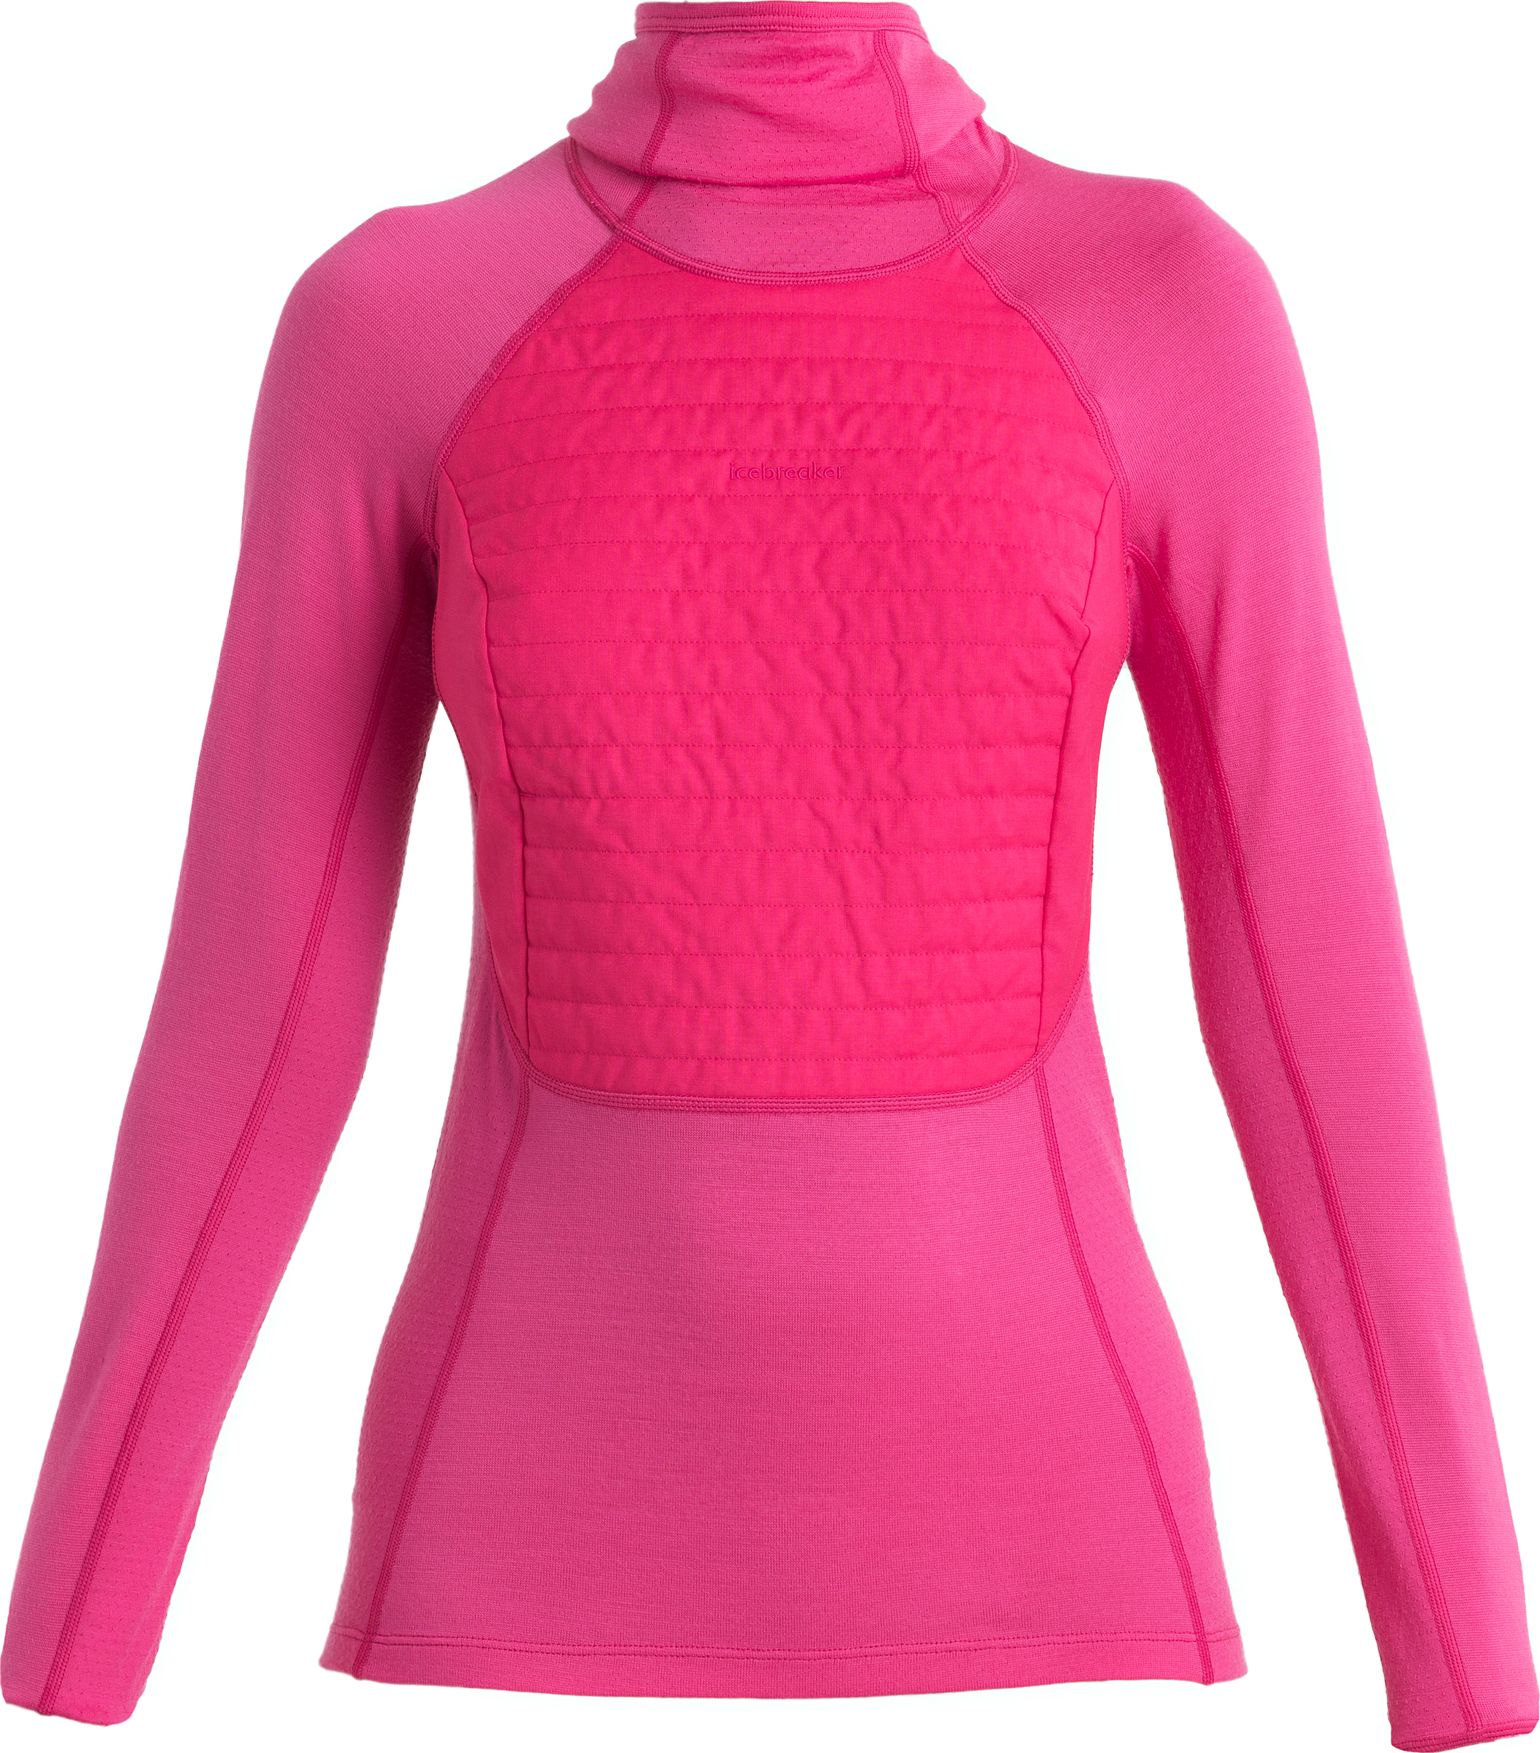 Women's Zoneknit Insulated Long Sleeve Hoodie Tempo